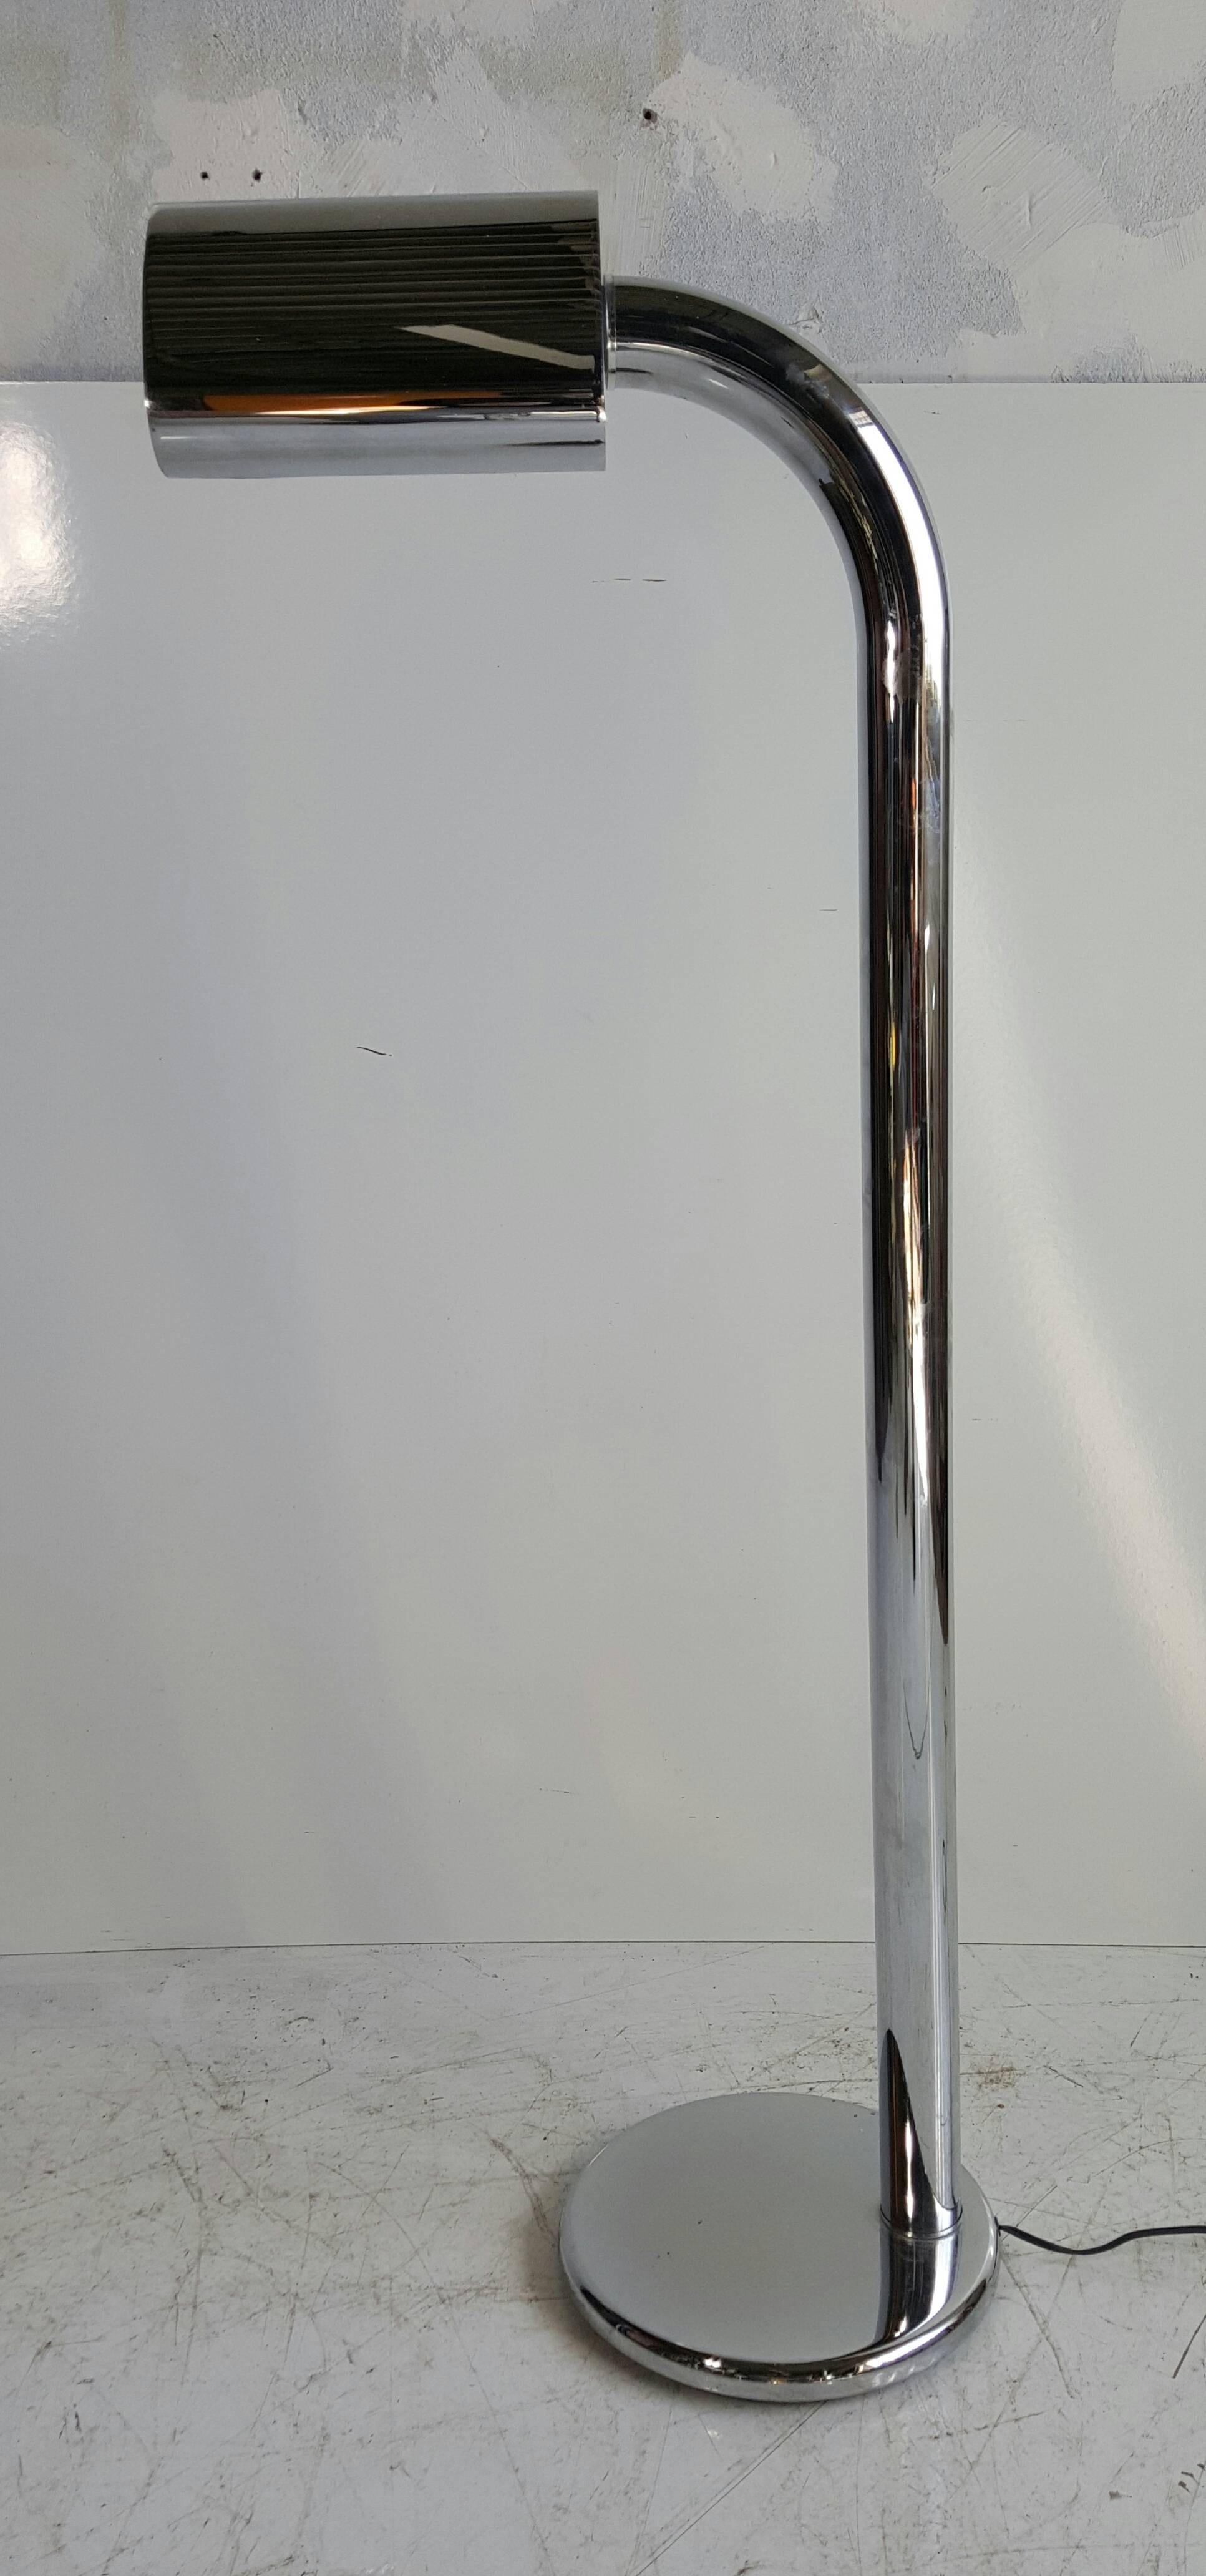 Modernist chromed steel floor lamp by Jim Bindman for Rainbow Lamp Co. Silver ball dimmer switch. Sleek, simple, elegant design, fit seamlessly into any environment.